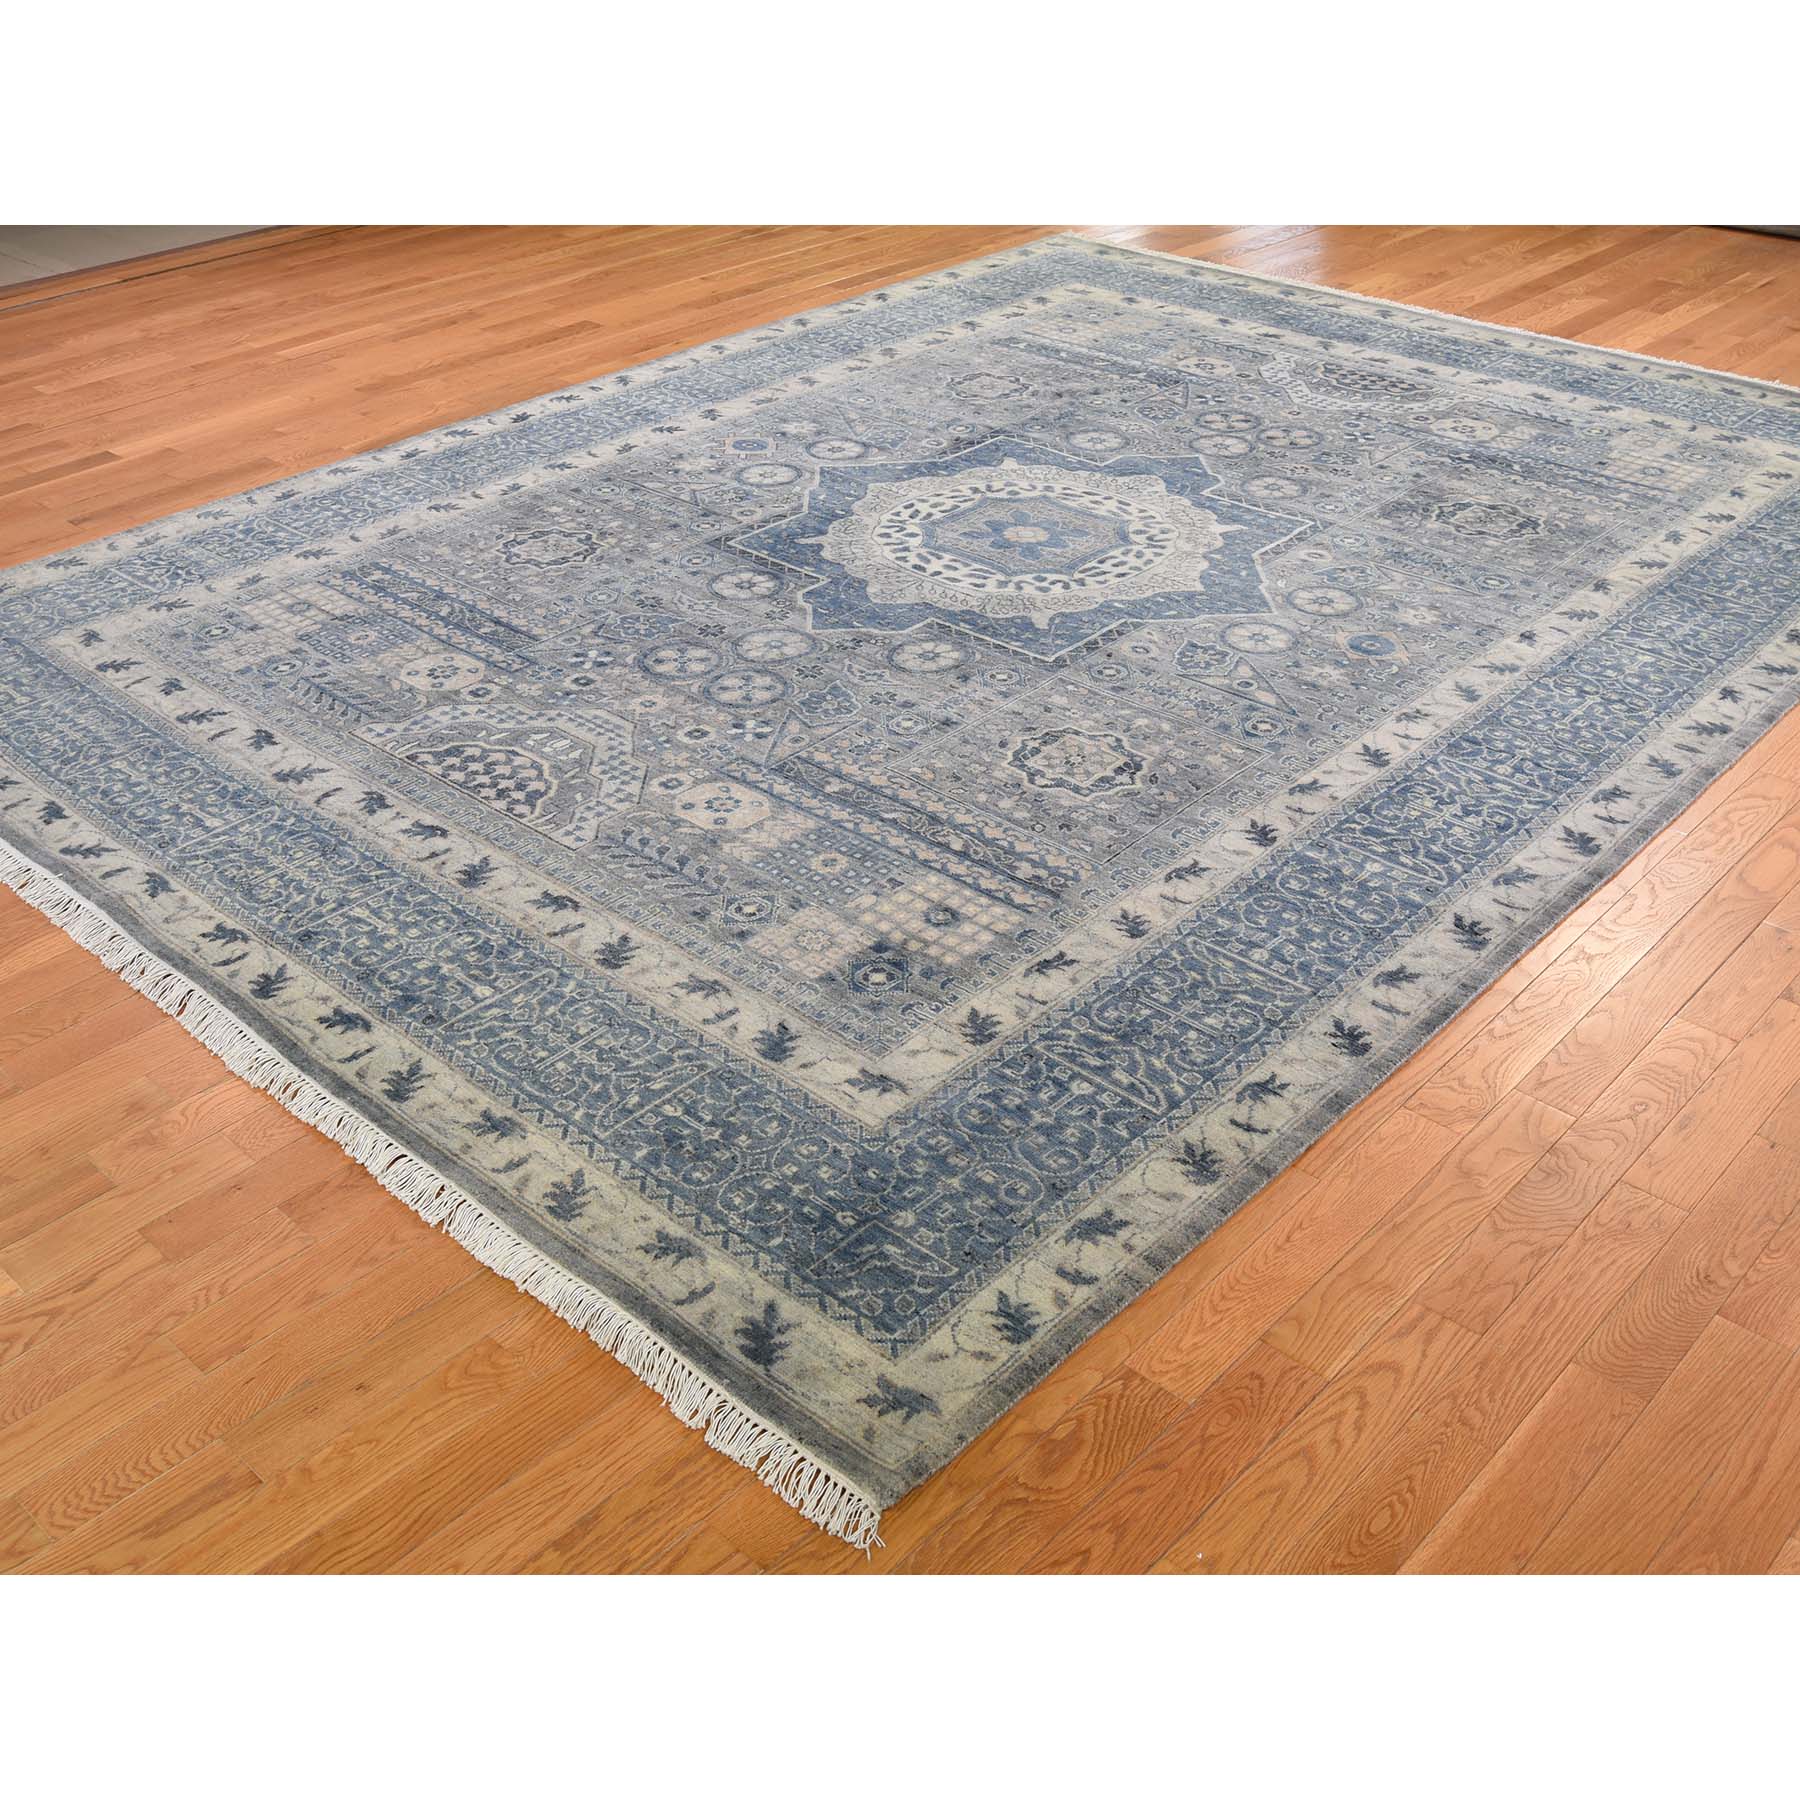 9-2 x12-2  Blue Pure Wool Mamluk Design Hand-Knotted Oriental Rug 